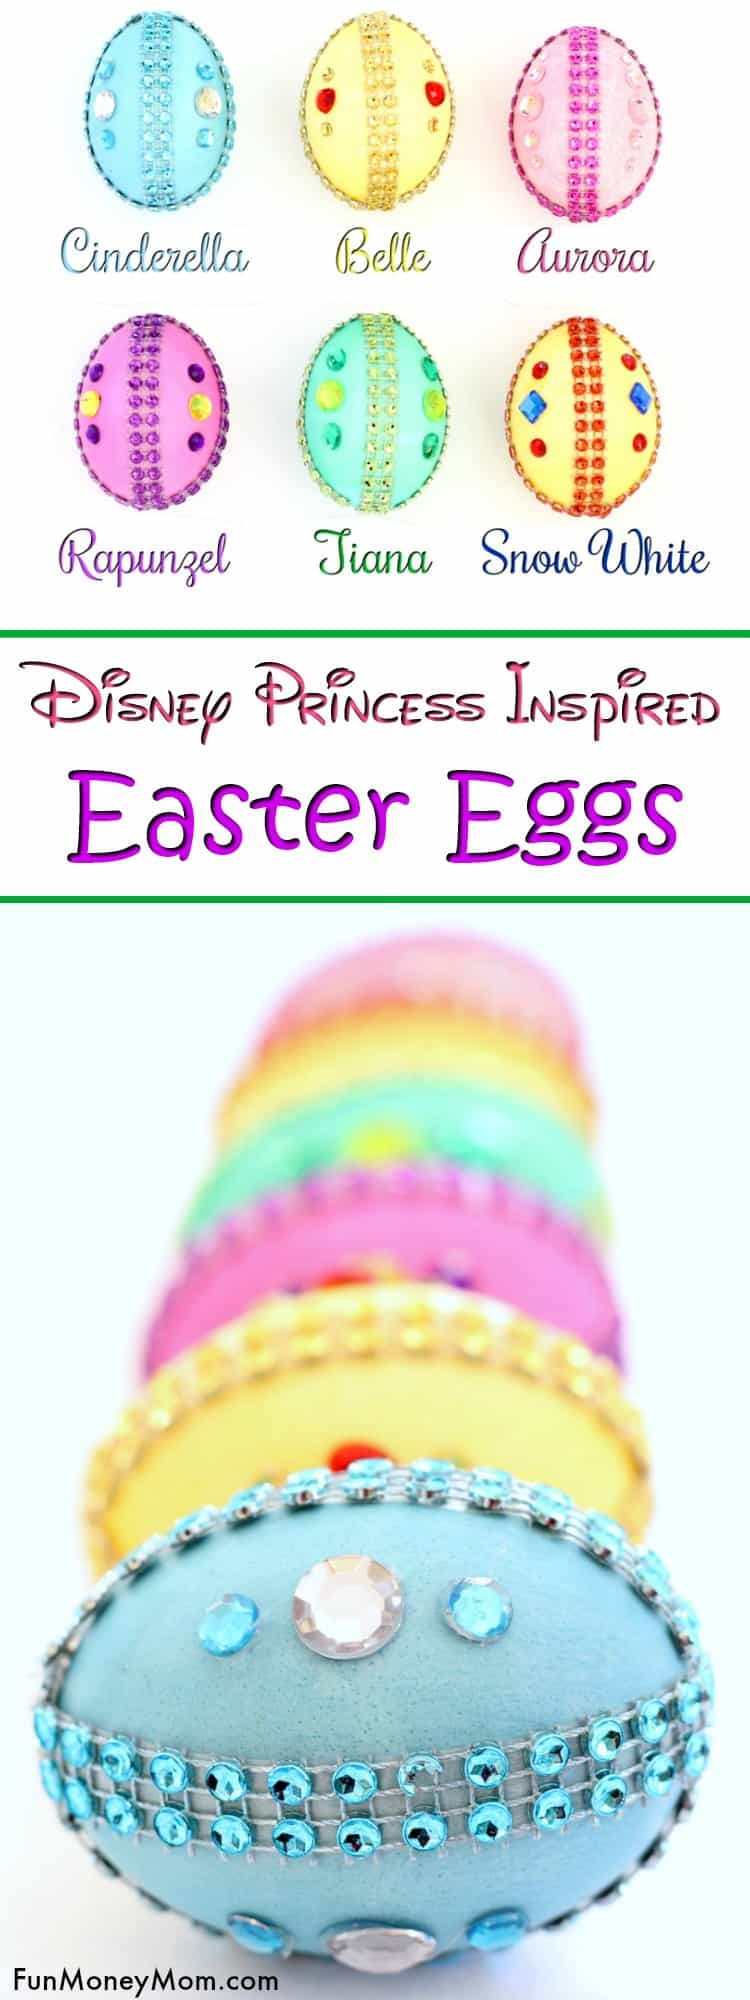 Disney Princess Easter Eggs - Planning on decorating Easter eggs for the holidays? These pretty Easter egg decorating ideas are perfect. If your kids are Disney Princess fans, they'll really love making their own princess inspired jeweled Easter eggs! #eastereggs #princesseggs #eastercraft #eastereggdecorating